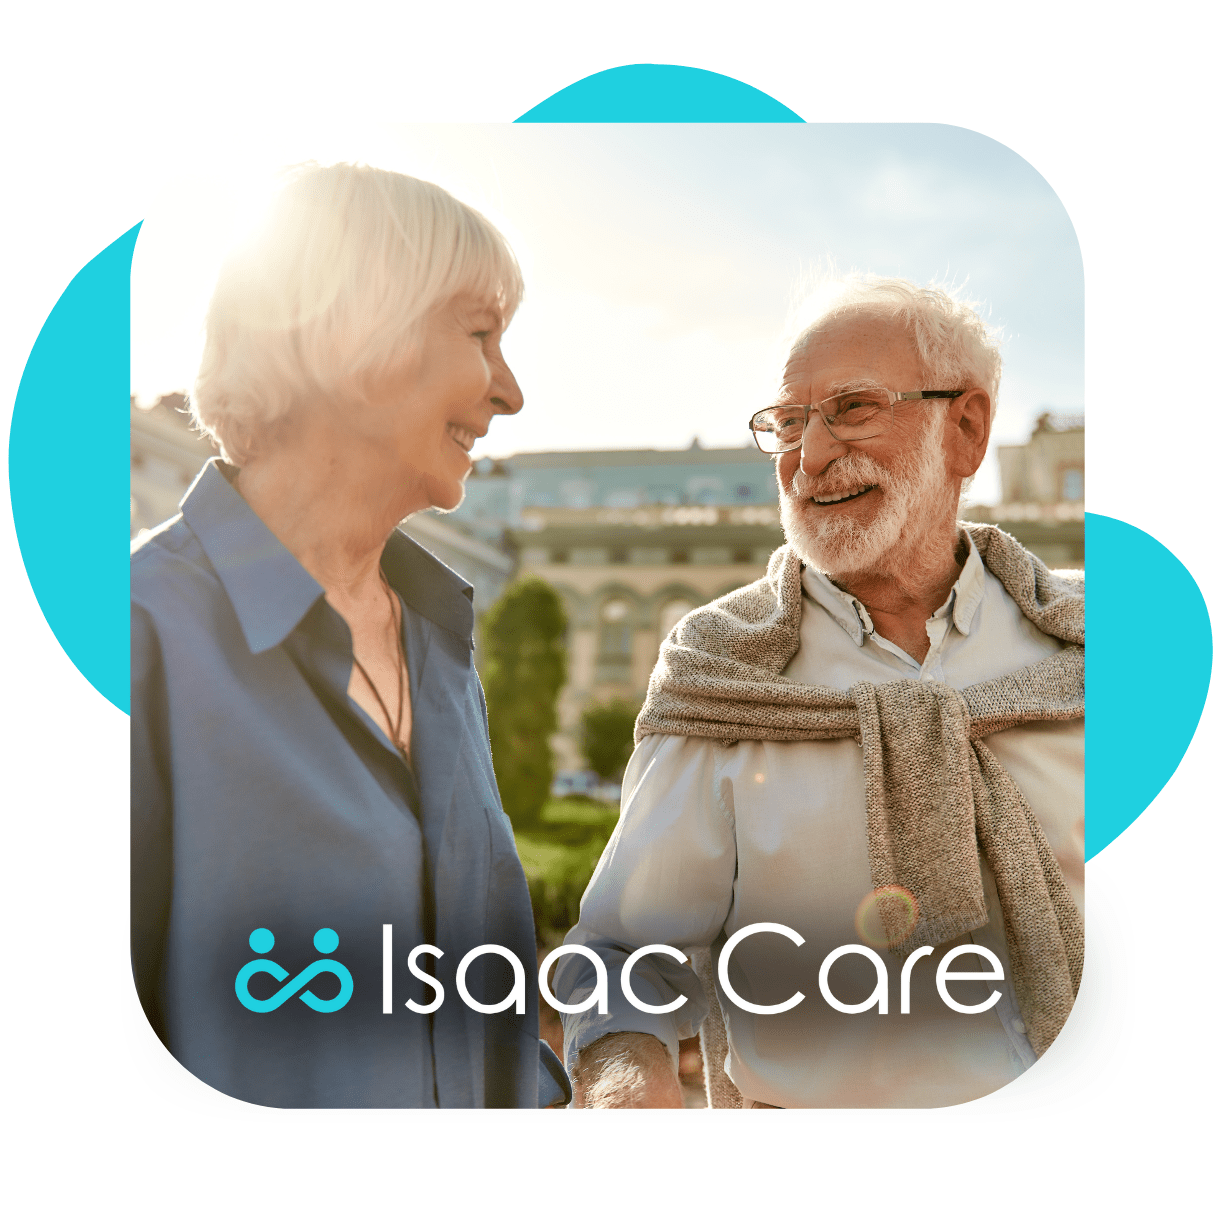 Stay Safe this Winter with Isaac Care